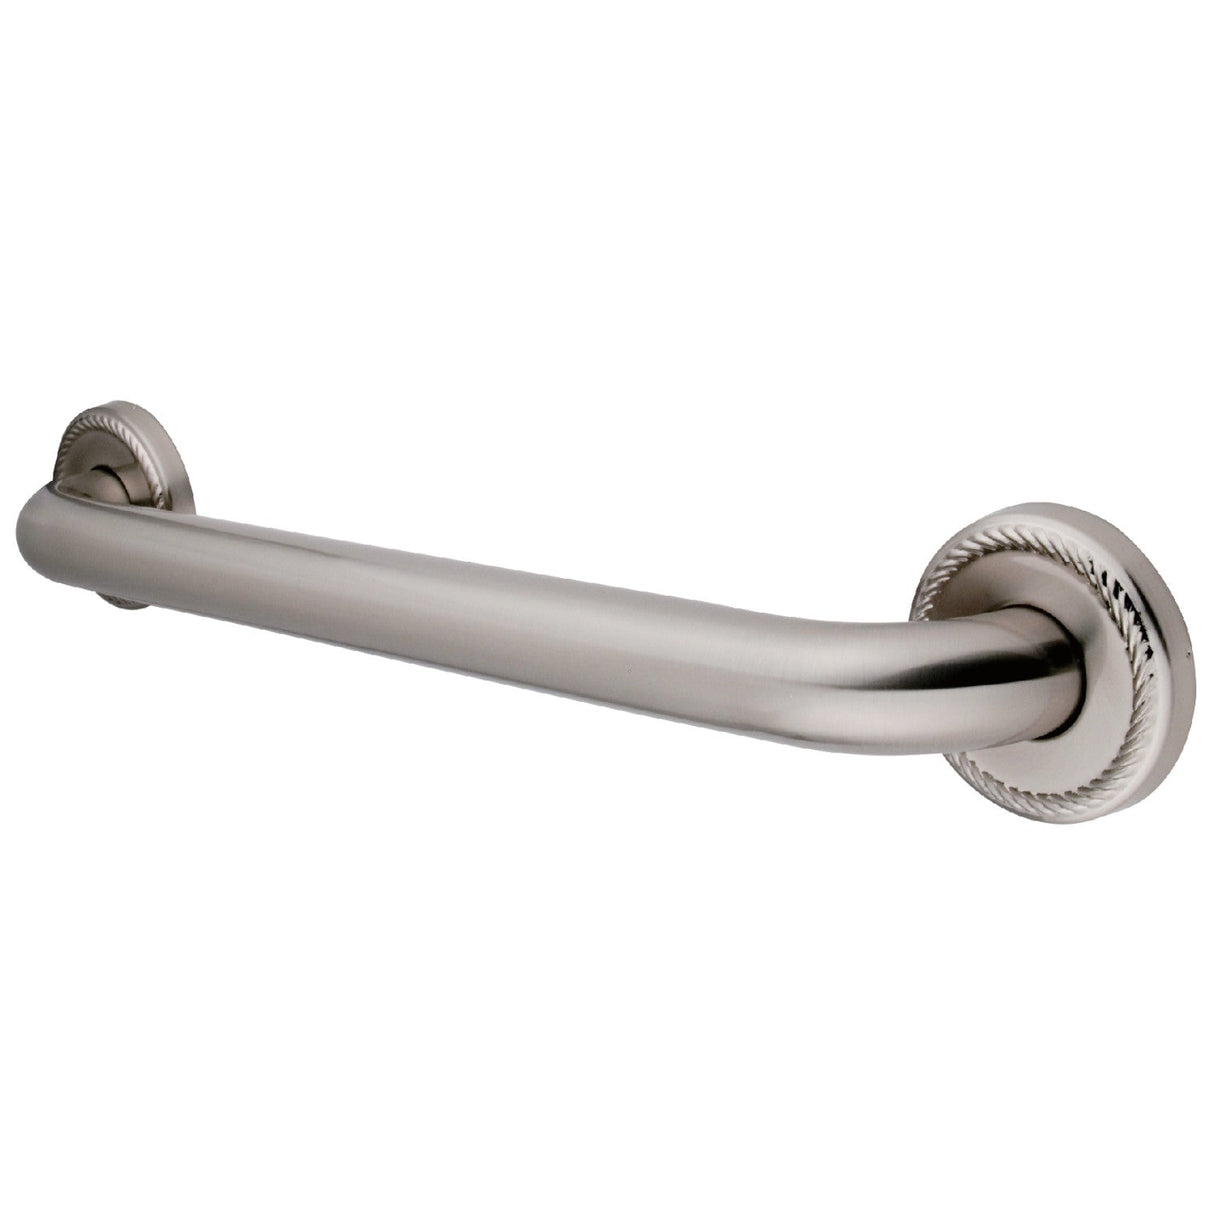 Laurel Thrive In Place DR814368 36-Inch X 1-1/4 Inch O.D Grab Bar, Brushed Nickel